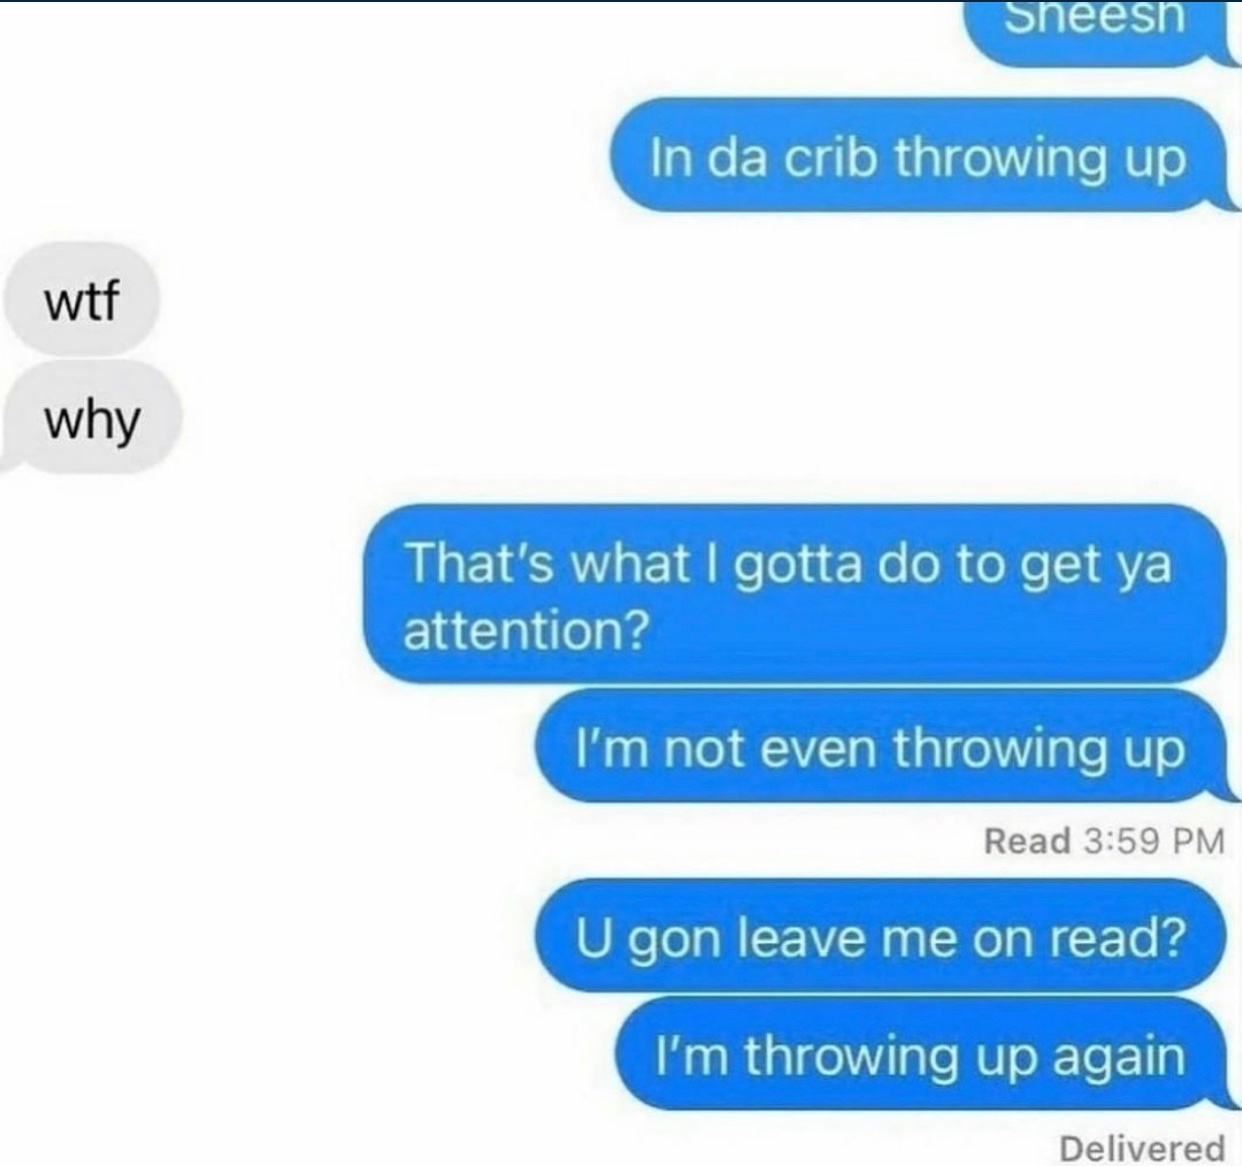 Dude's Taking L's Online - da crib throwing up - Sheesh In da crib throwing up wtf why That's what I gotta do to get ya attention? I'm not even throwing up Read U gon leave me on read? I'm throwing up again Delivered